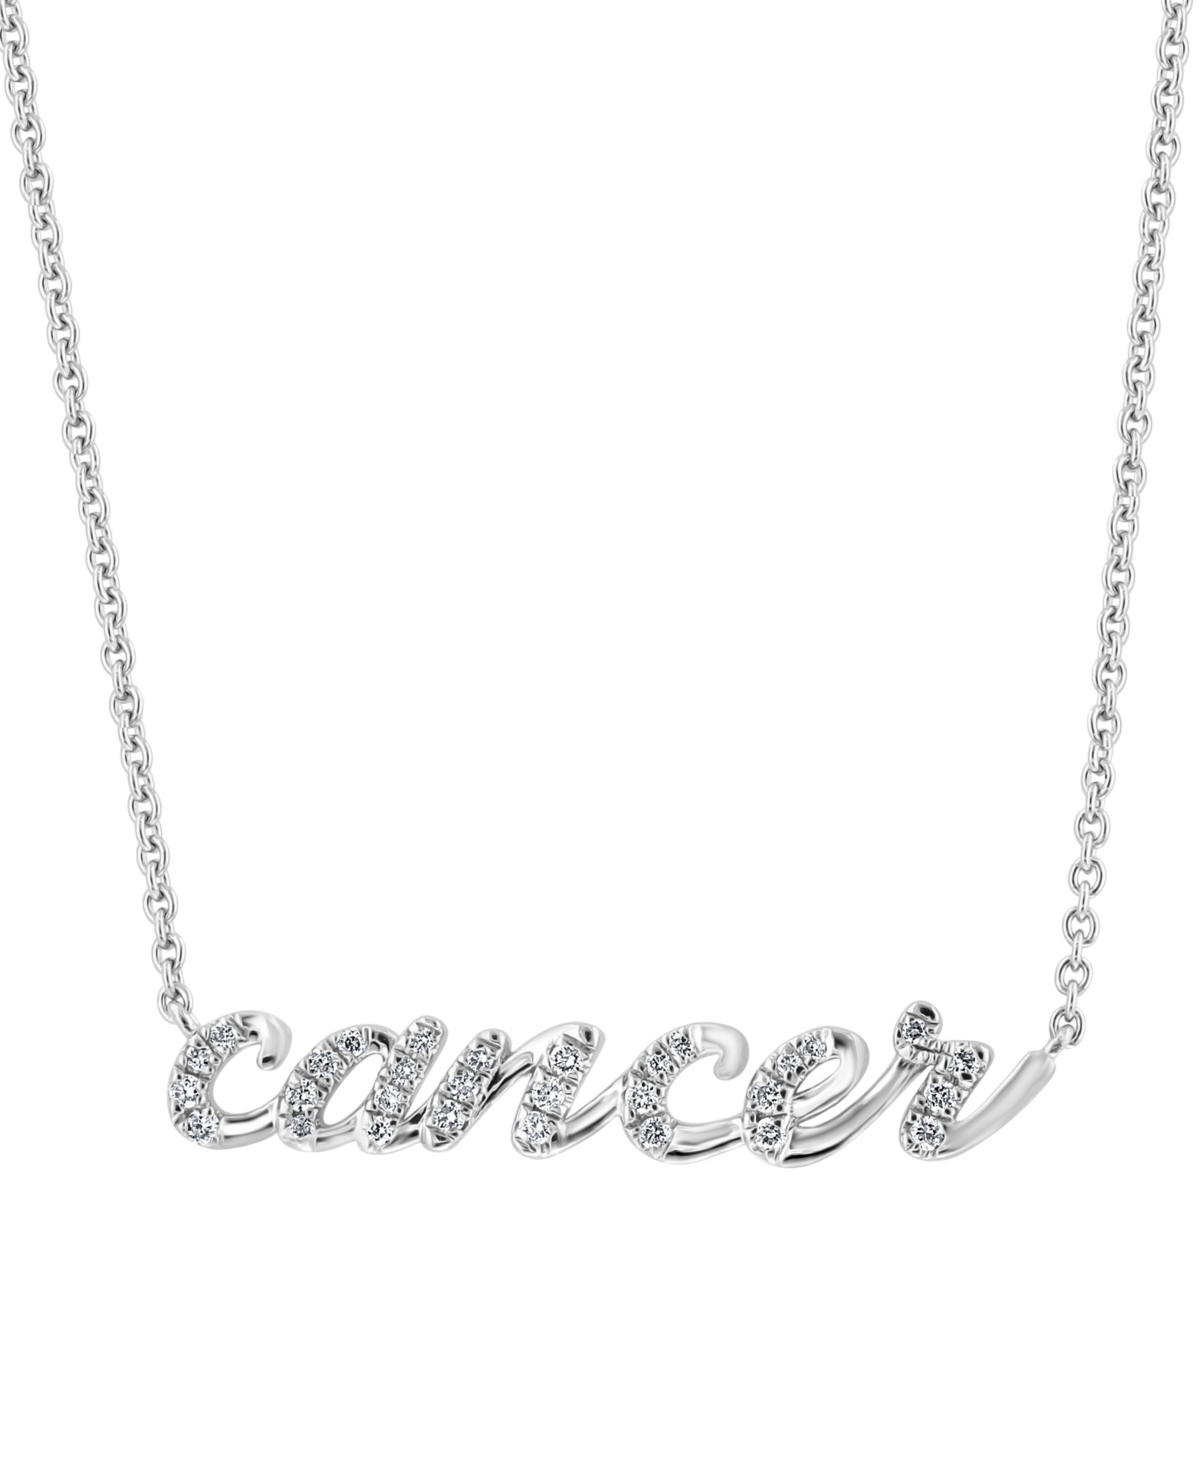 Effy Diamond Zodiac Cancer 18" Pendant Necklace (1/10 ct. t.w.) in Sterling Silver - Sterling Silver